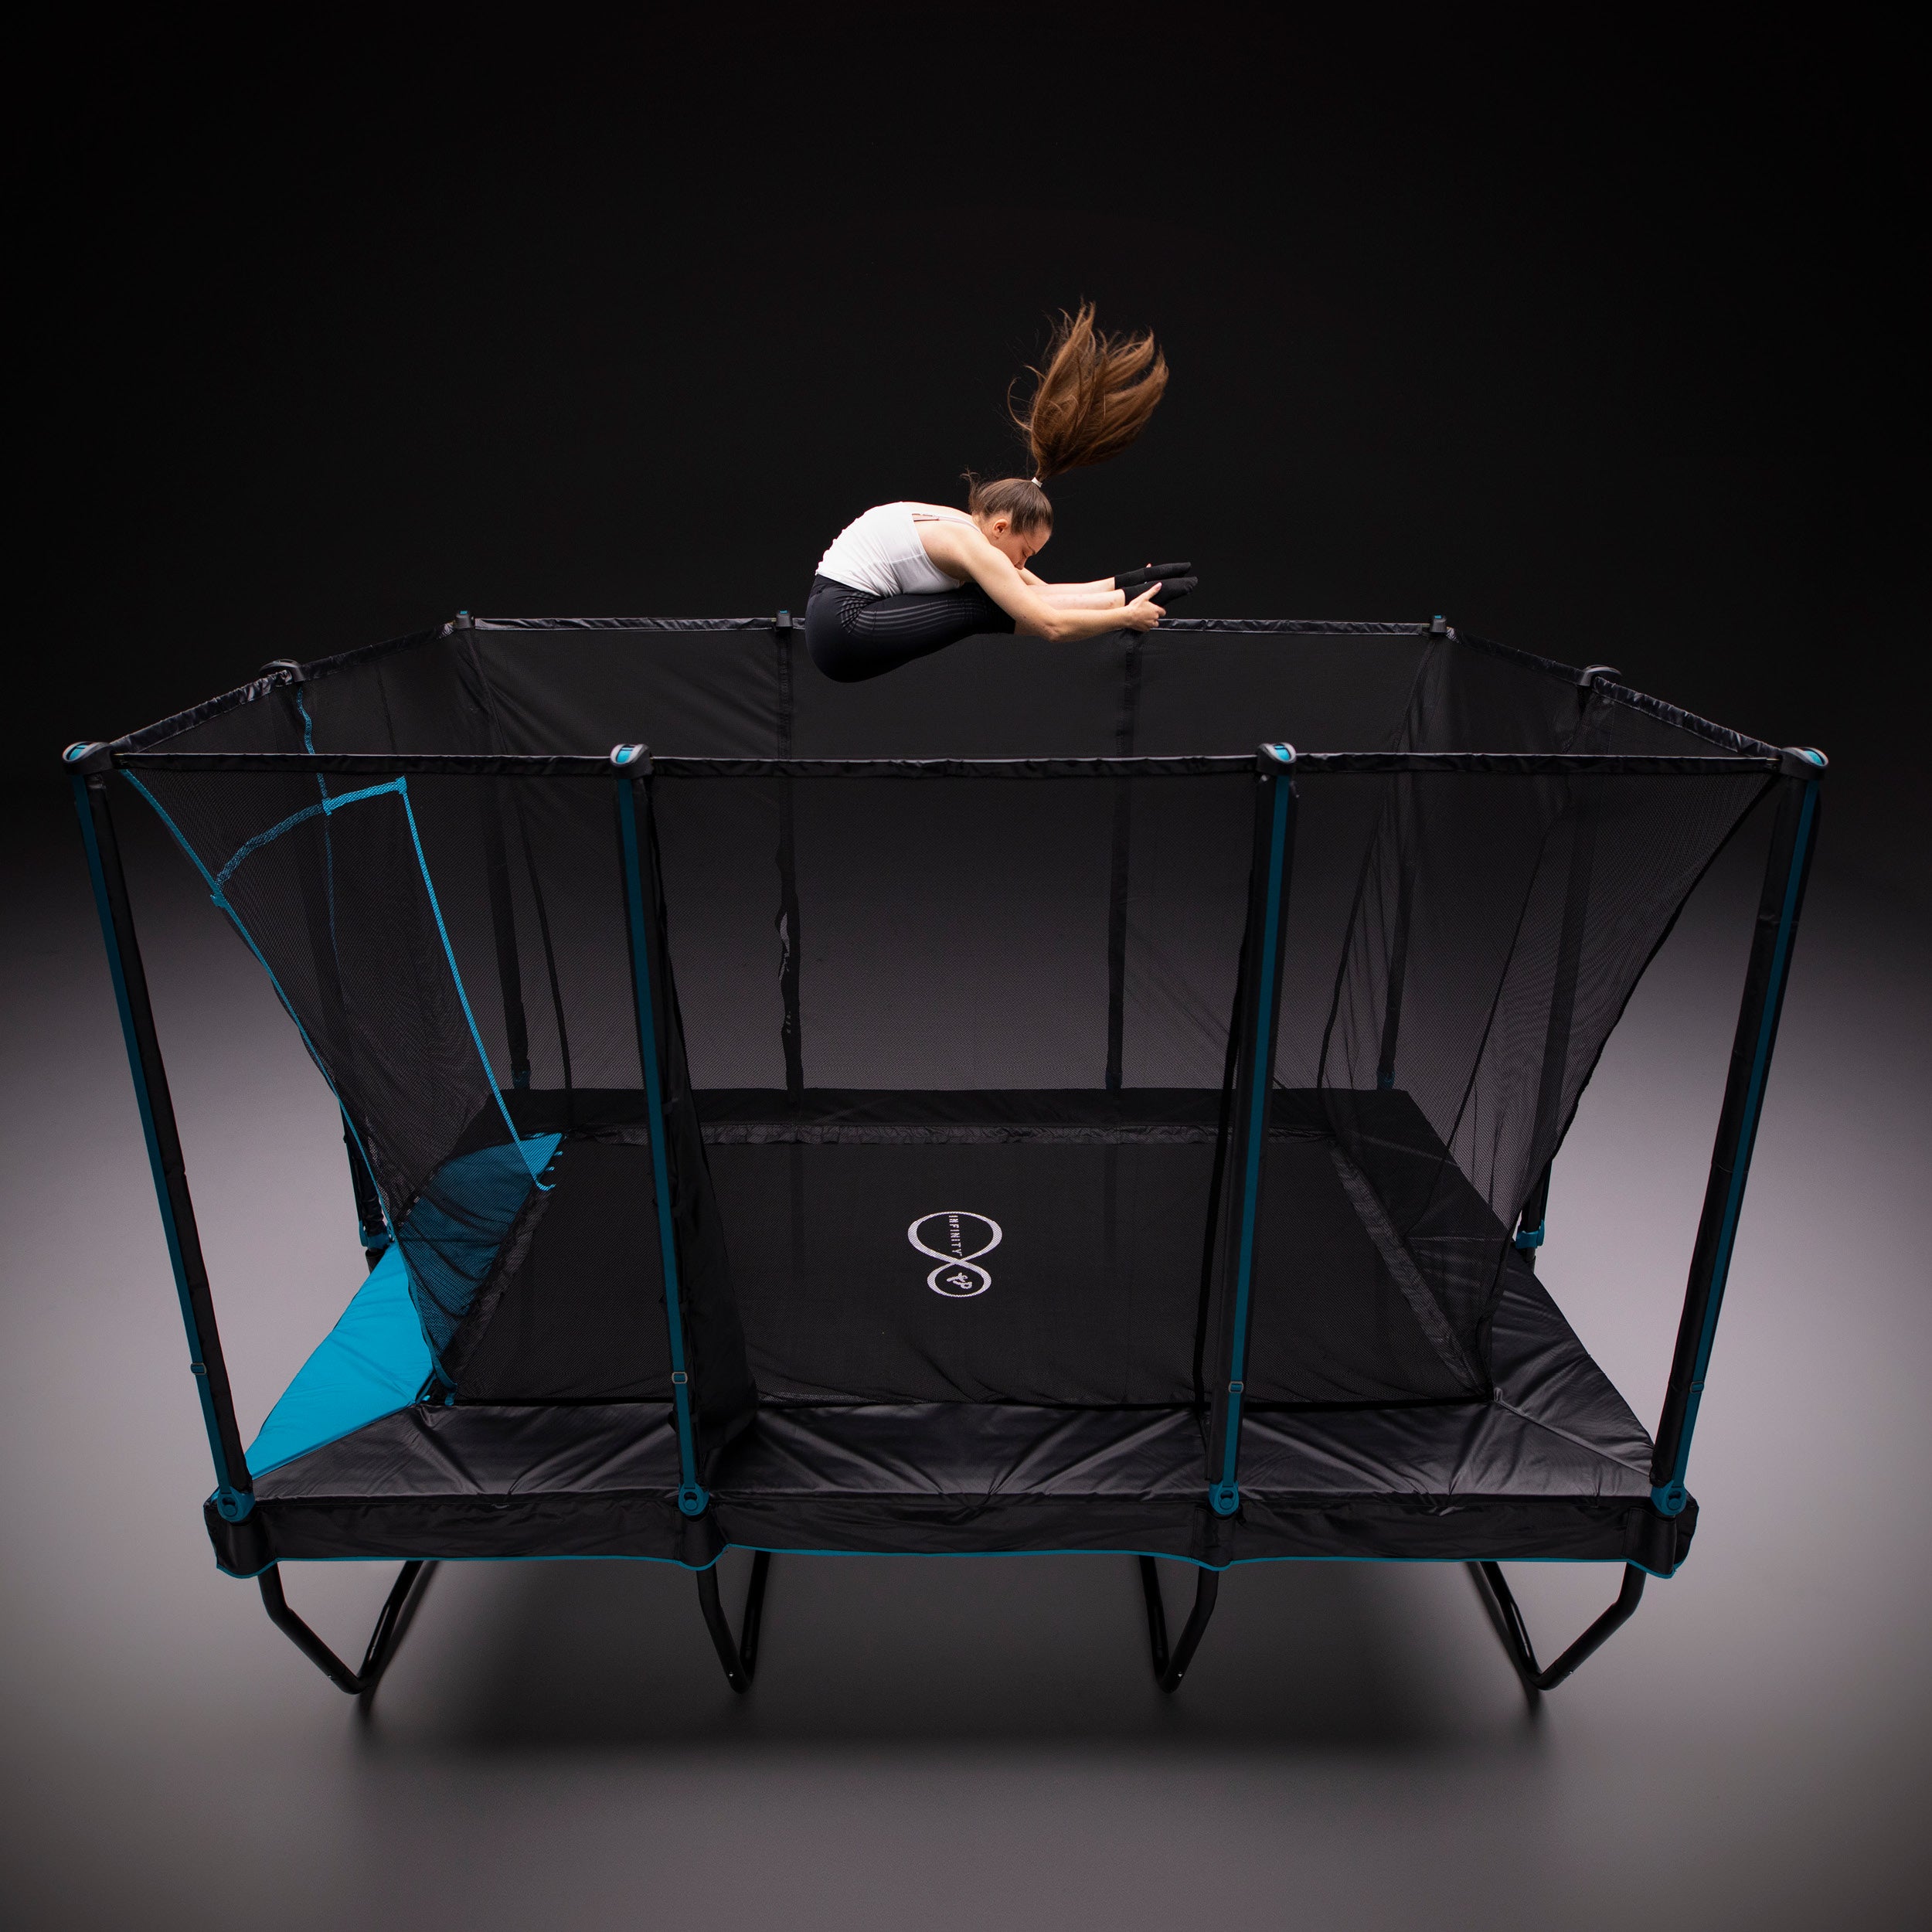  What Are the Unique Advantages of Rectangle Trampolines for Aspiring Gymnasts and Athletes? 